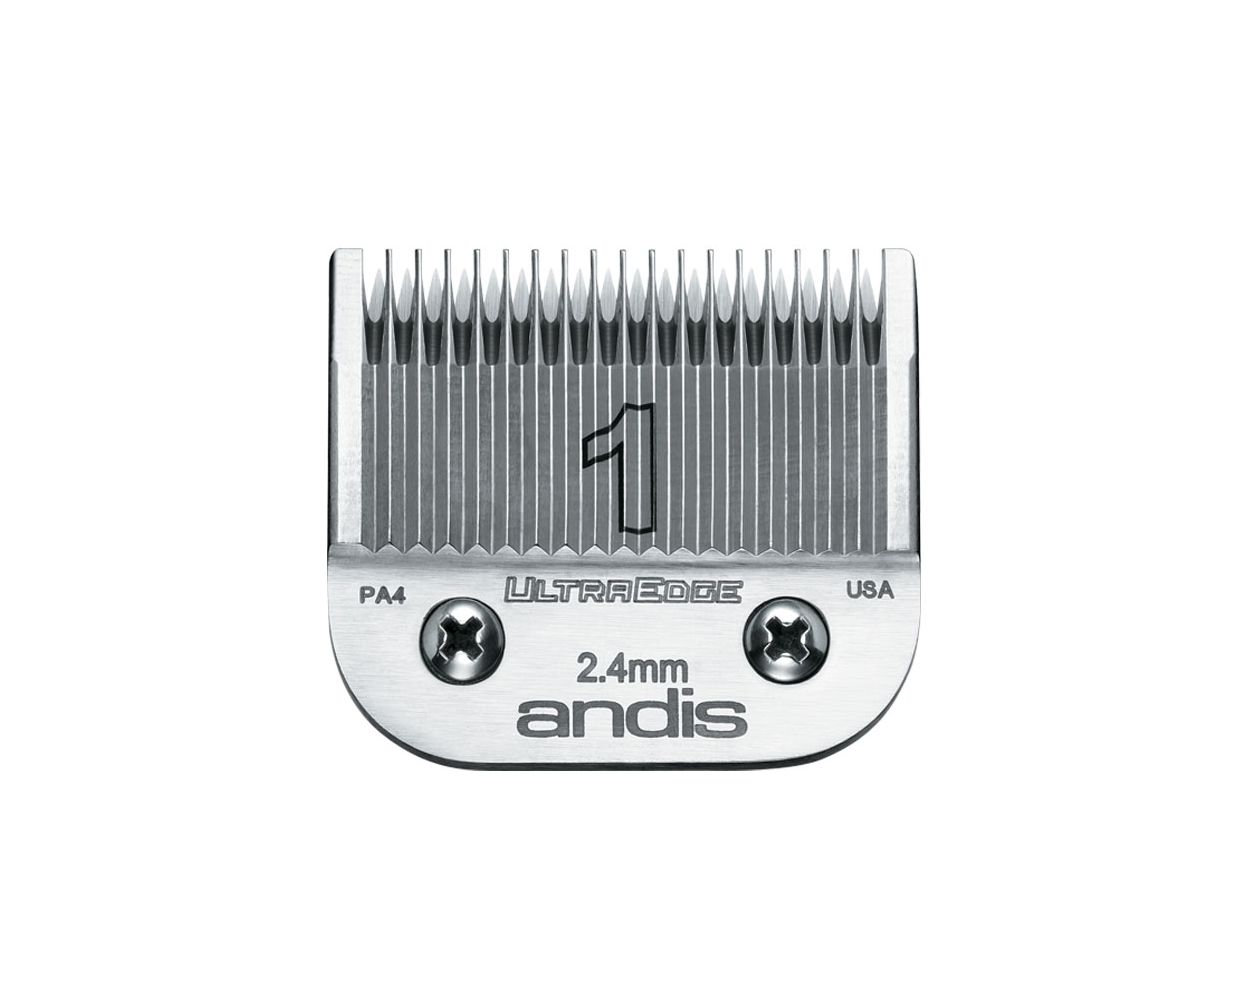 #64070 ANDIS ULTRA EDGE BLADE #1 2.4mm